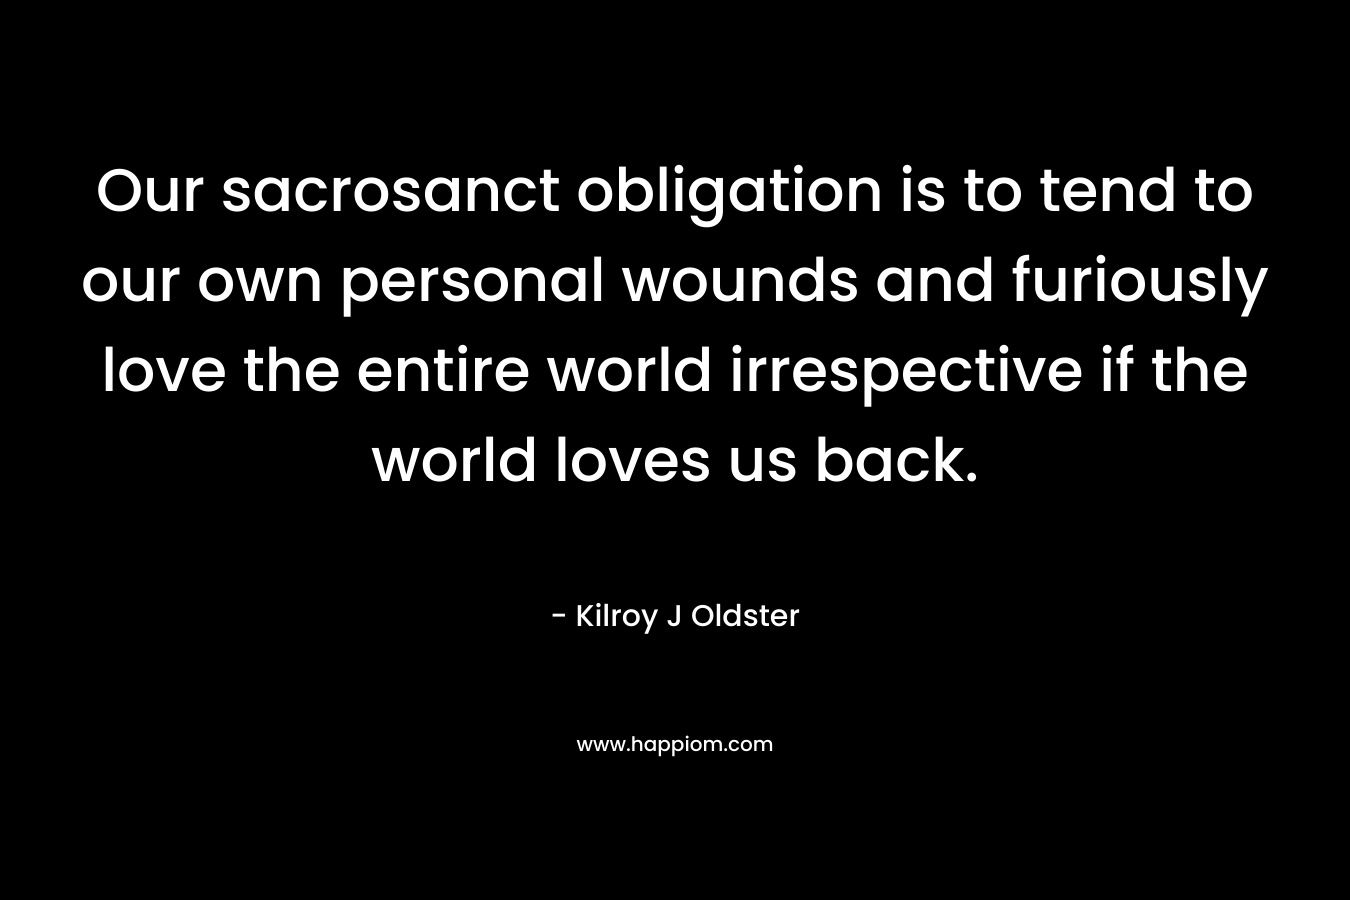 Our sacrosanct obligation is to tend to our own personal wounds and furiously love the entire world irrespective if the world loves us back.